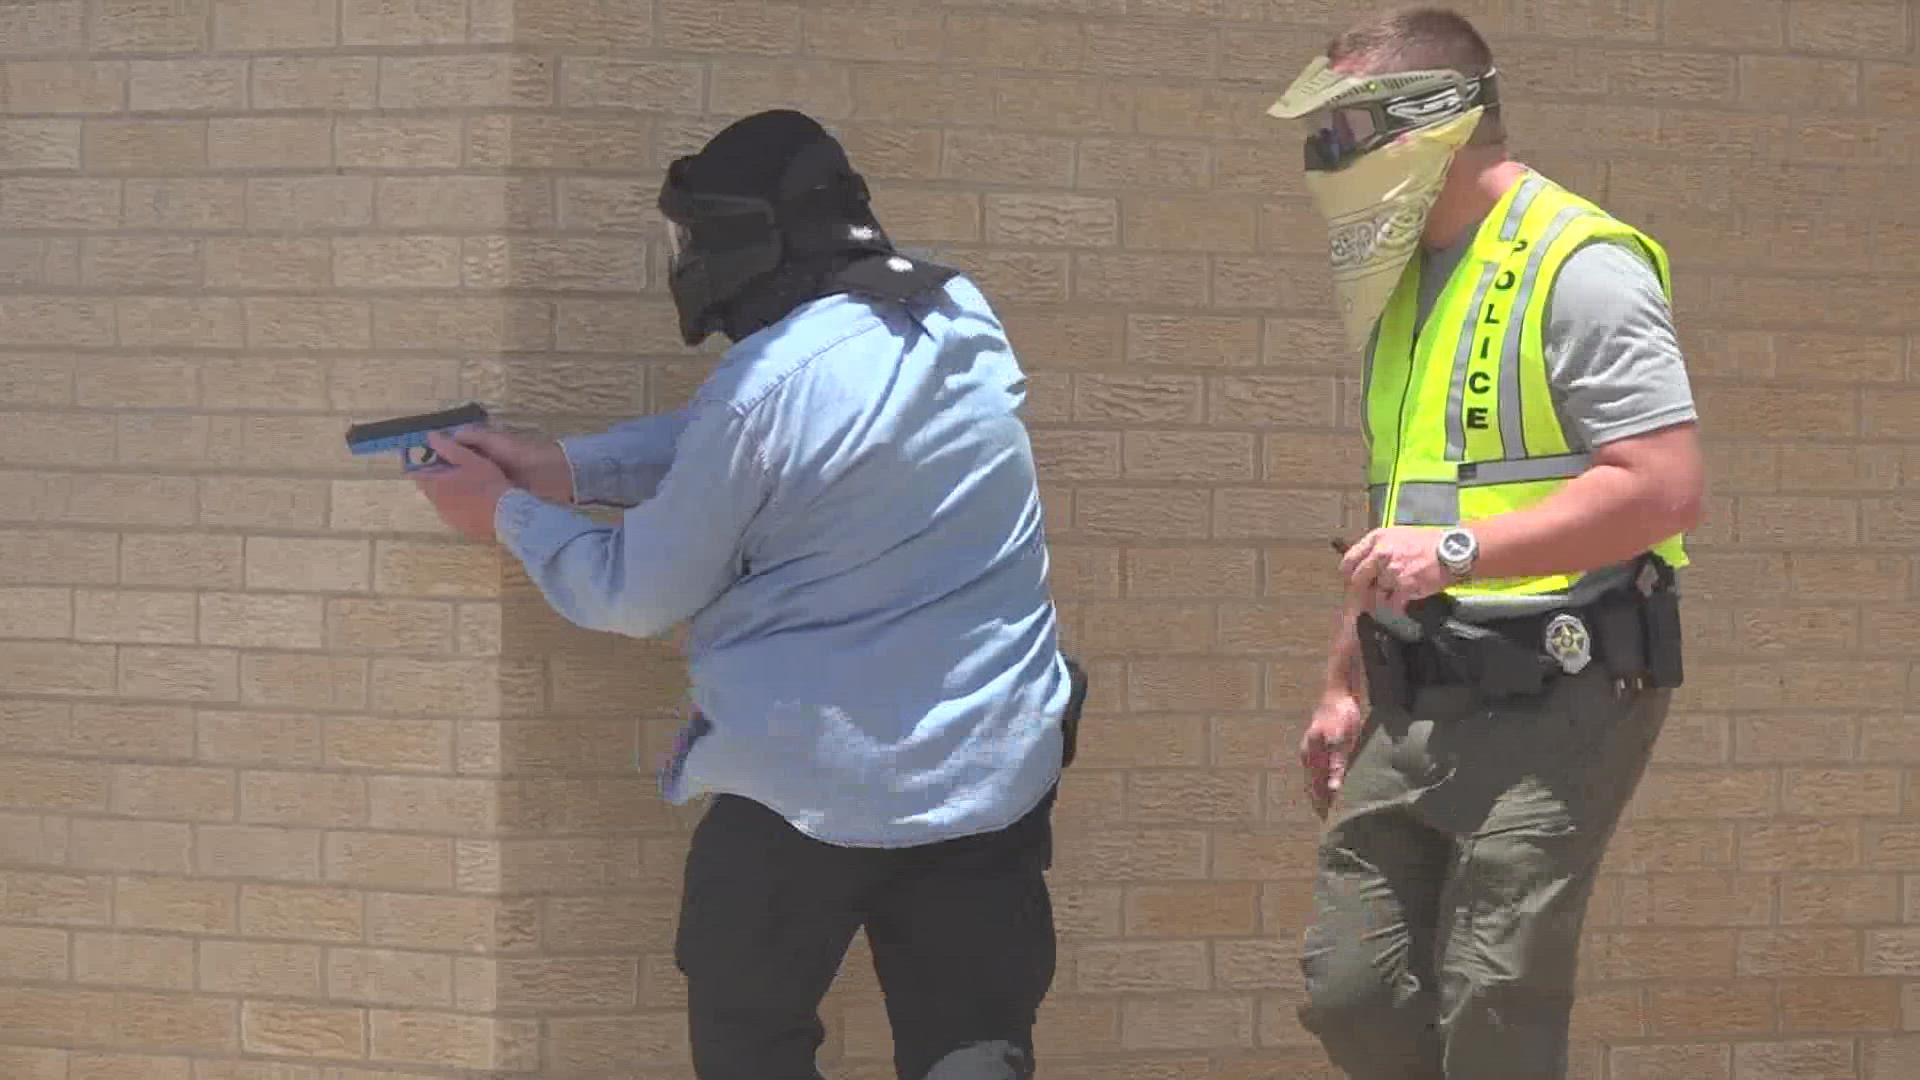 The training focused primarily on solo officer response to an active shooter situation.